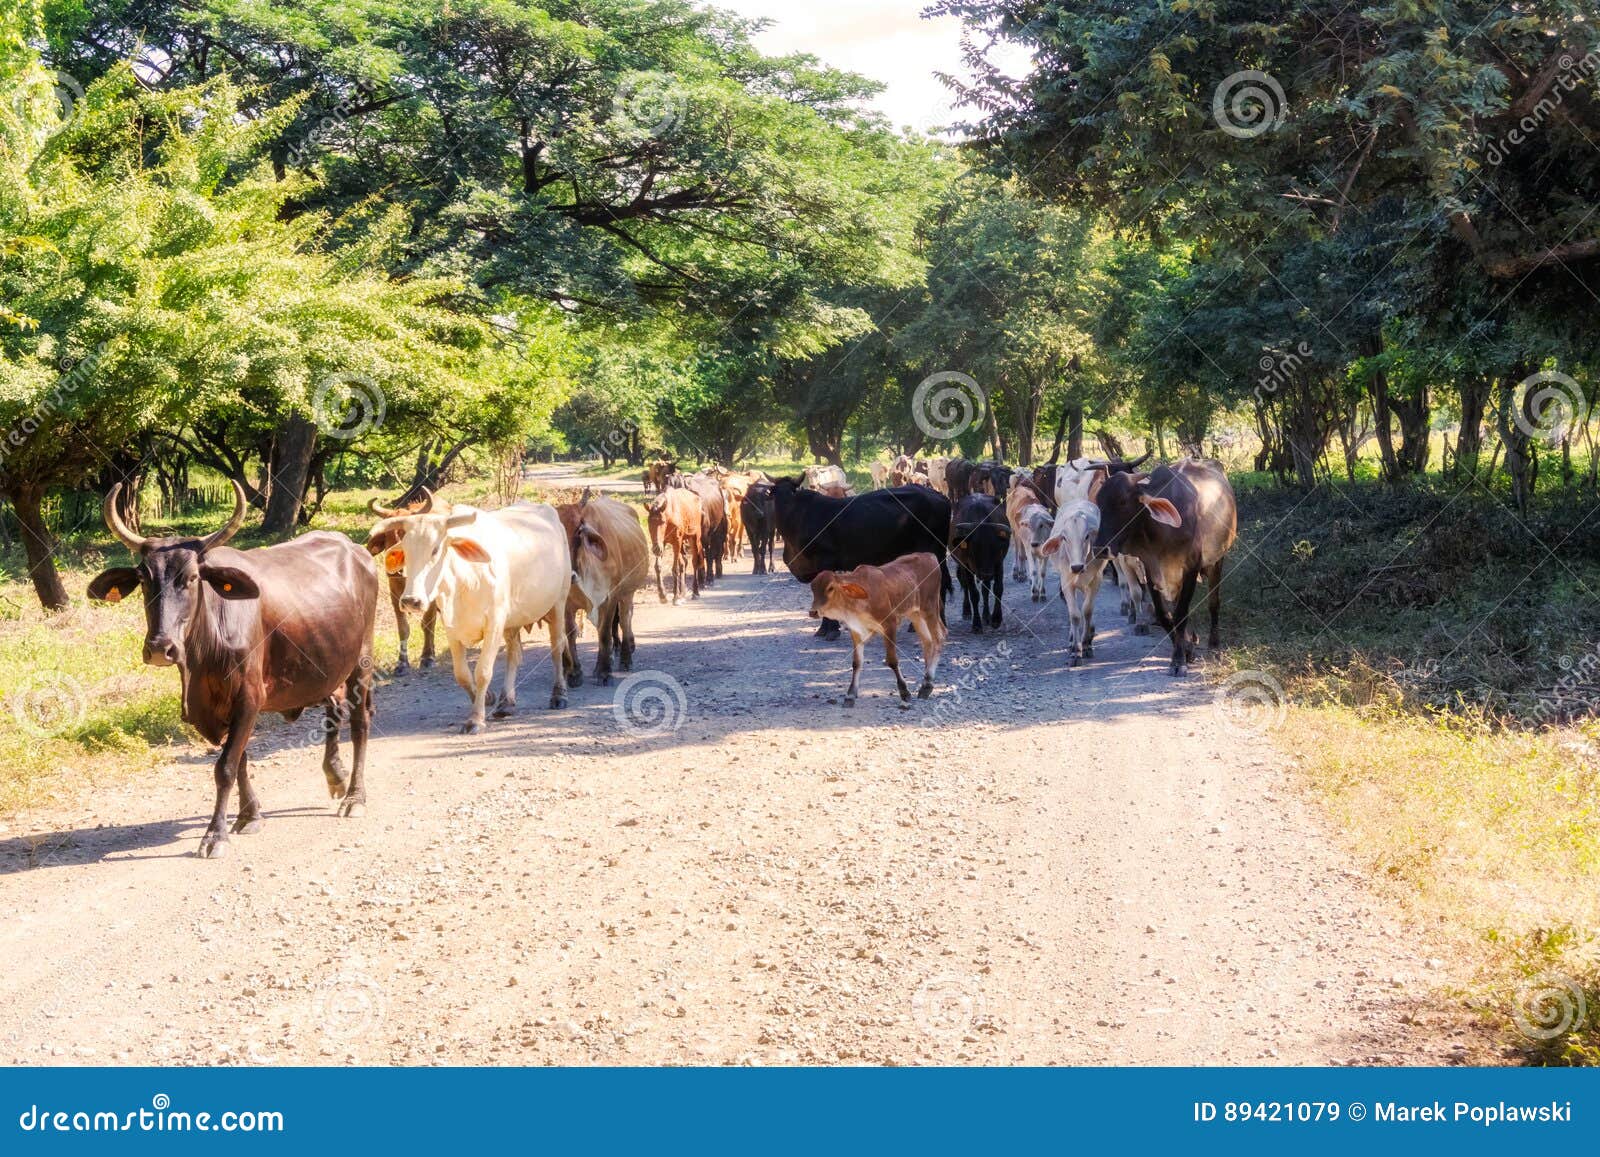 cows on the road 39 in nicaragua